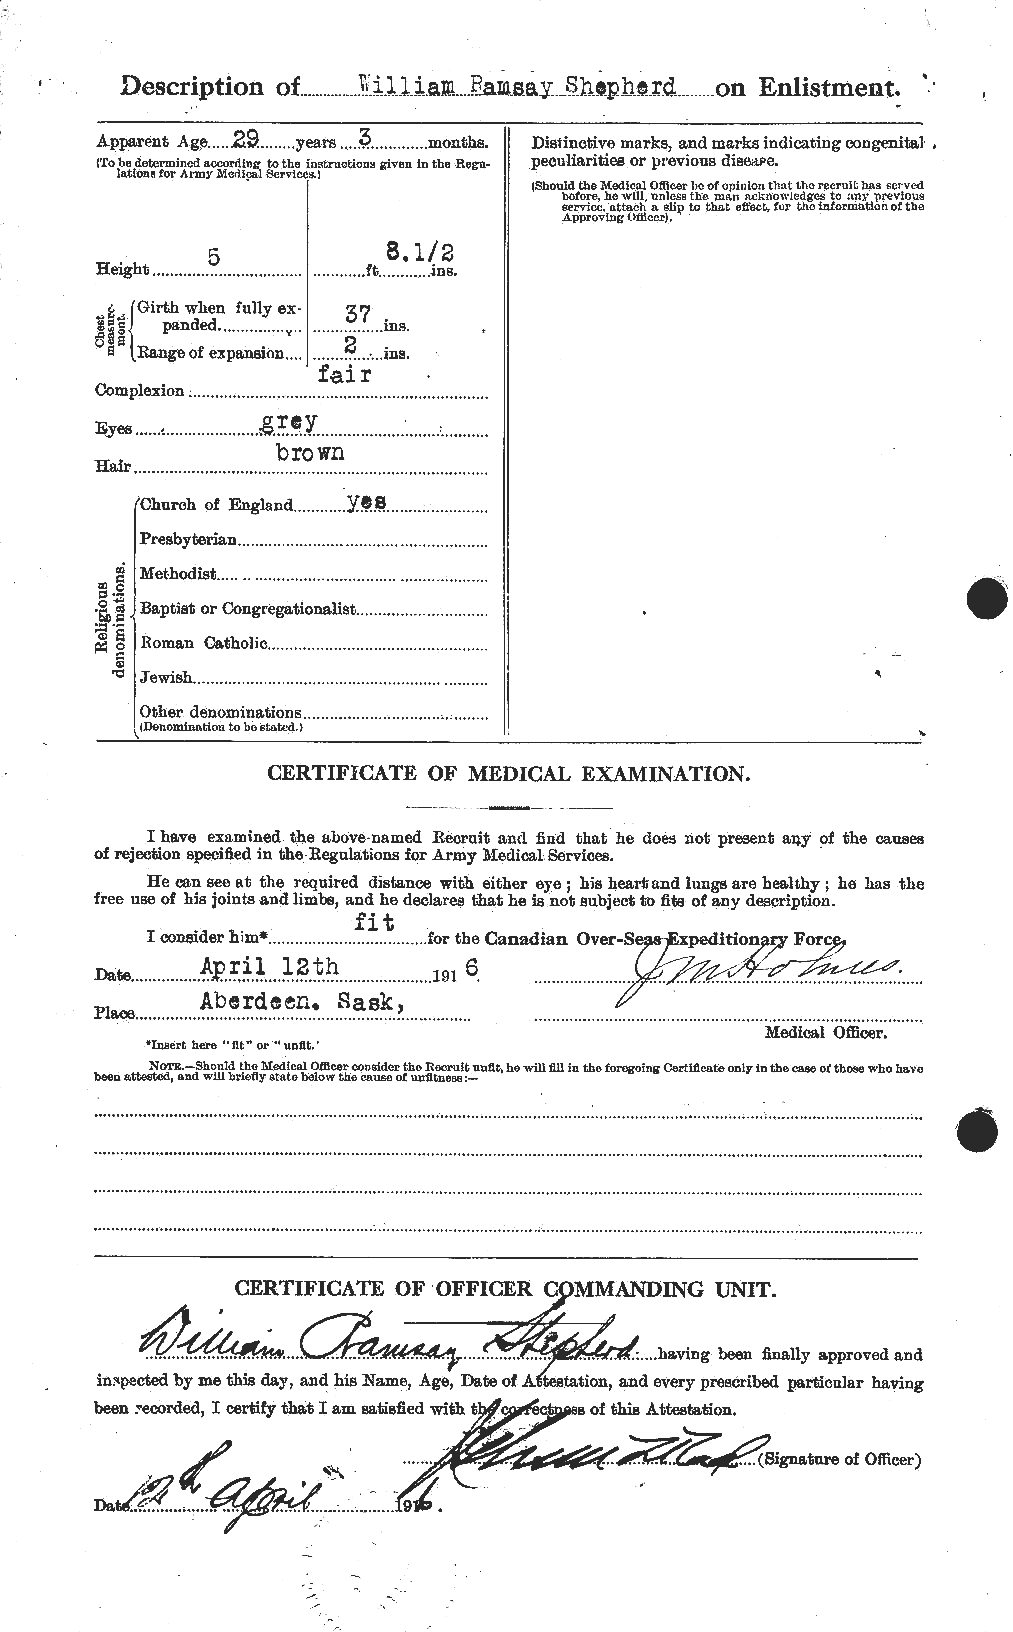 Personnel Records of the First World War - CEF 094457b